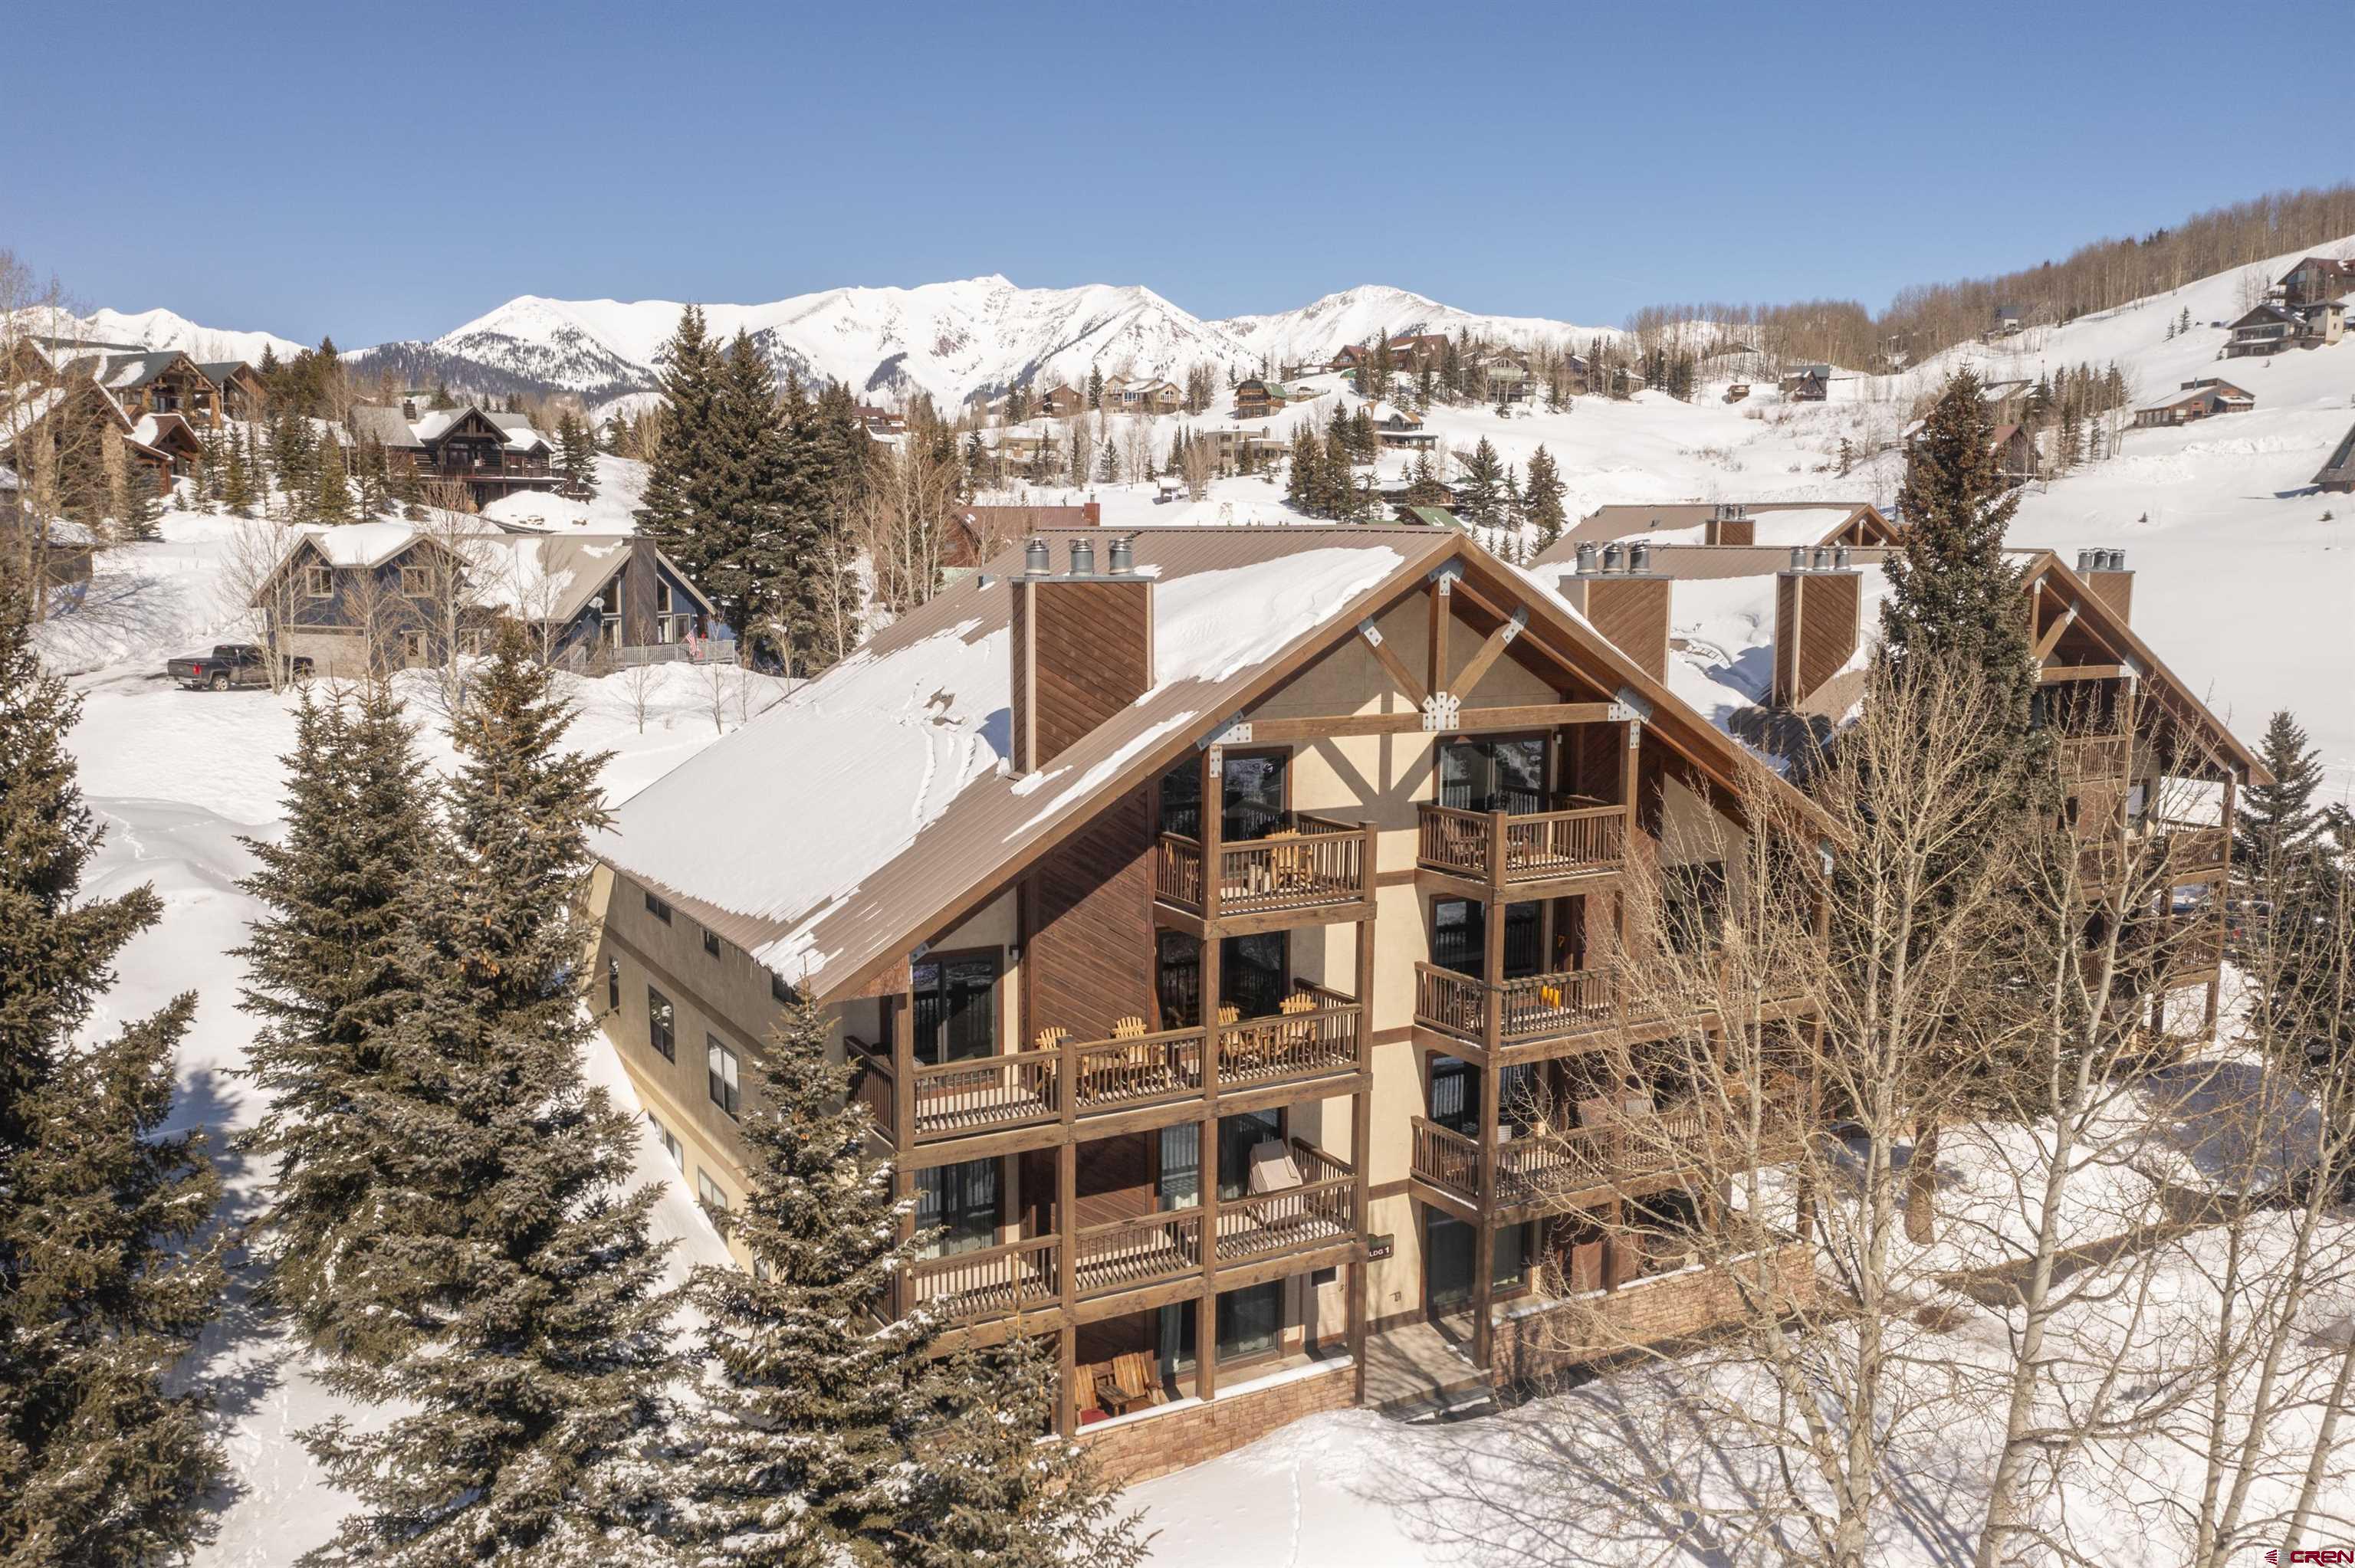 17 Treasury Road, Mt. Crested Butte, CO 